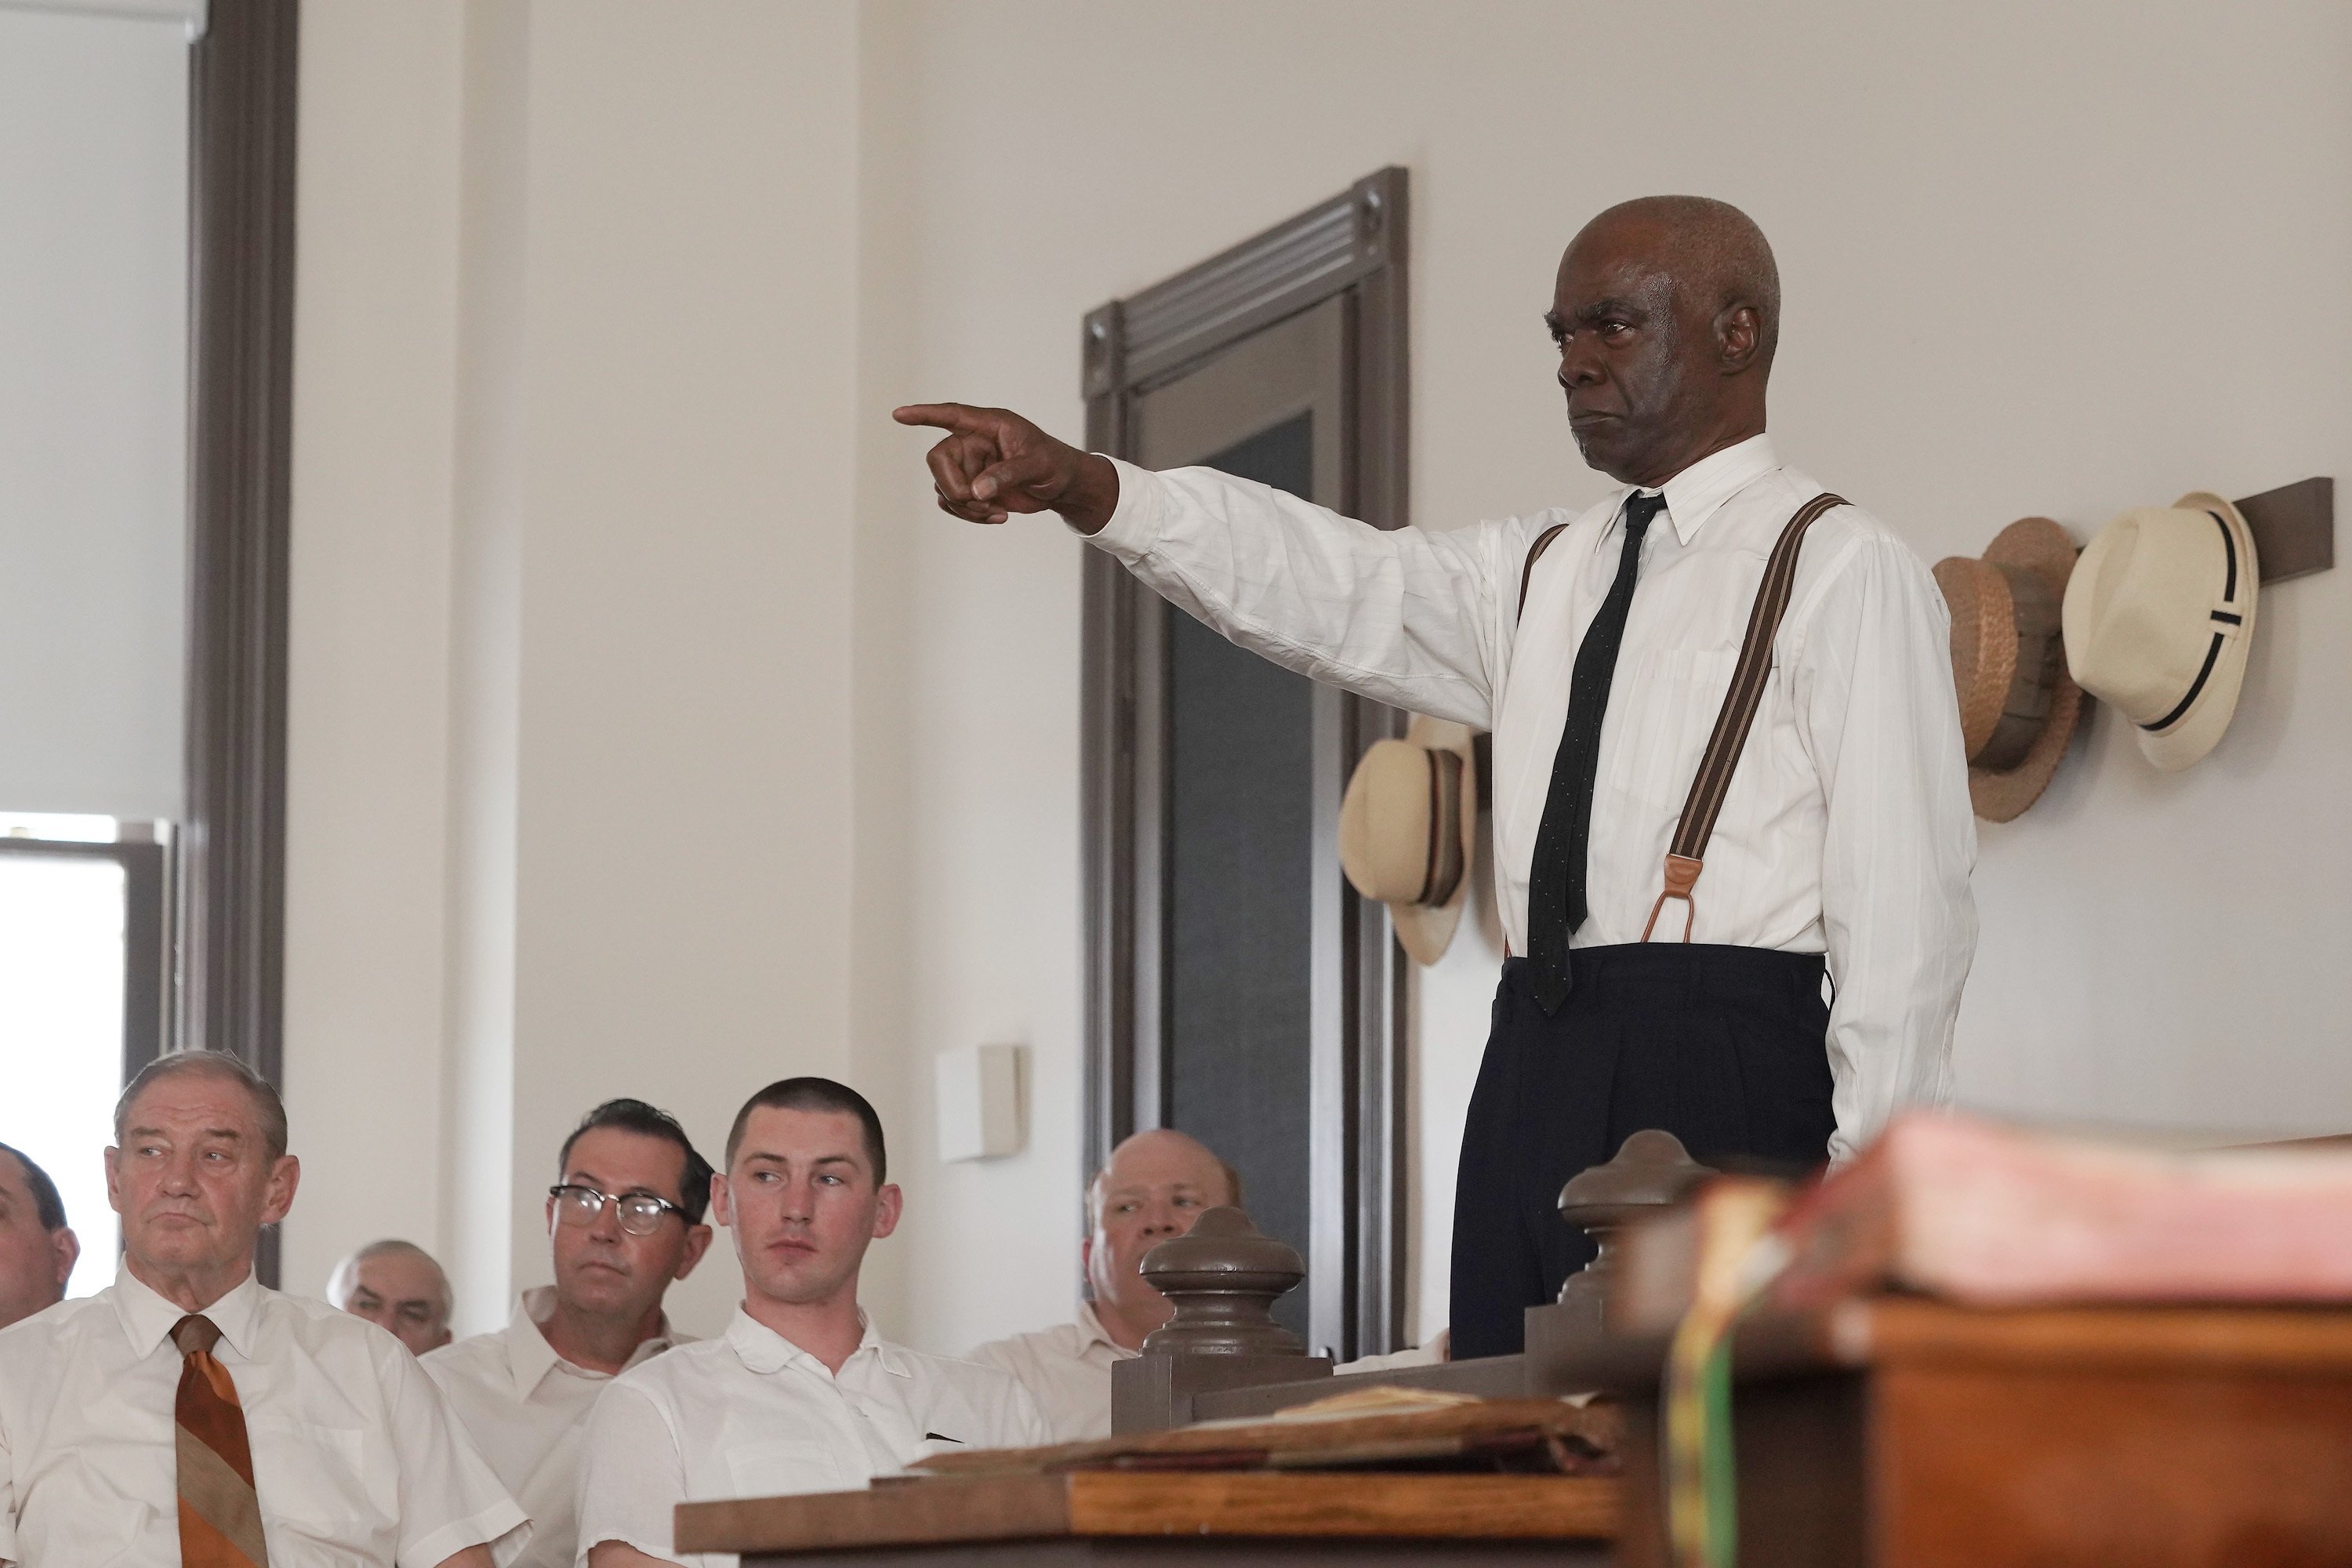 'Women of the Movement' Glynn Turman portrays Mose Wright pointing in the courtroom